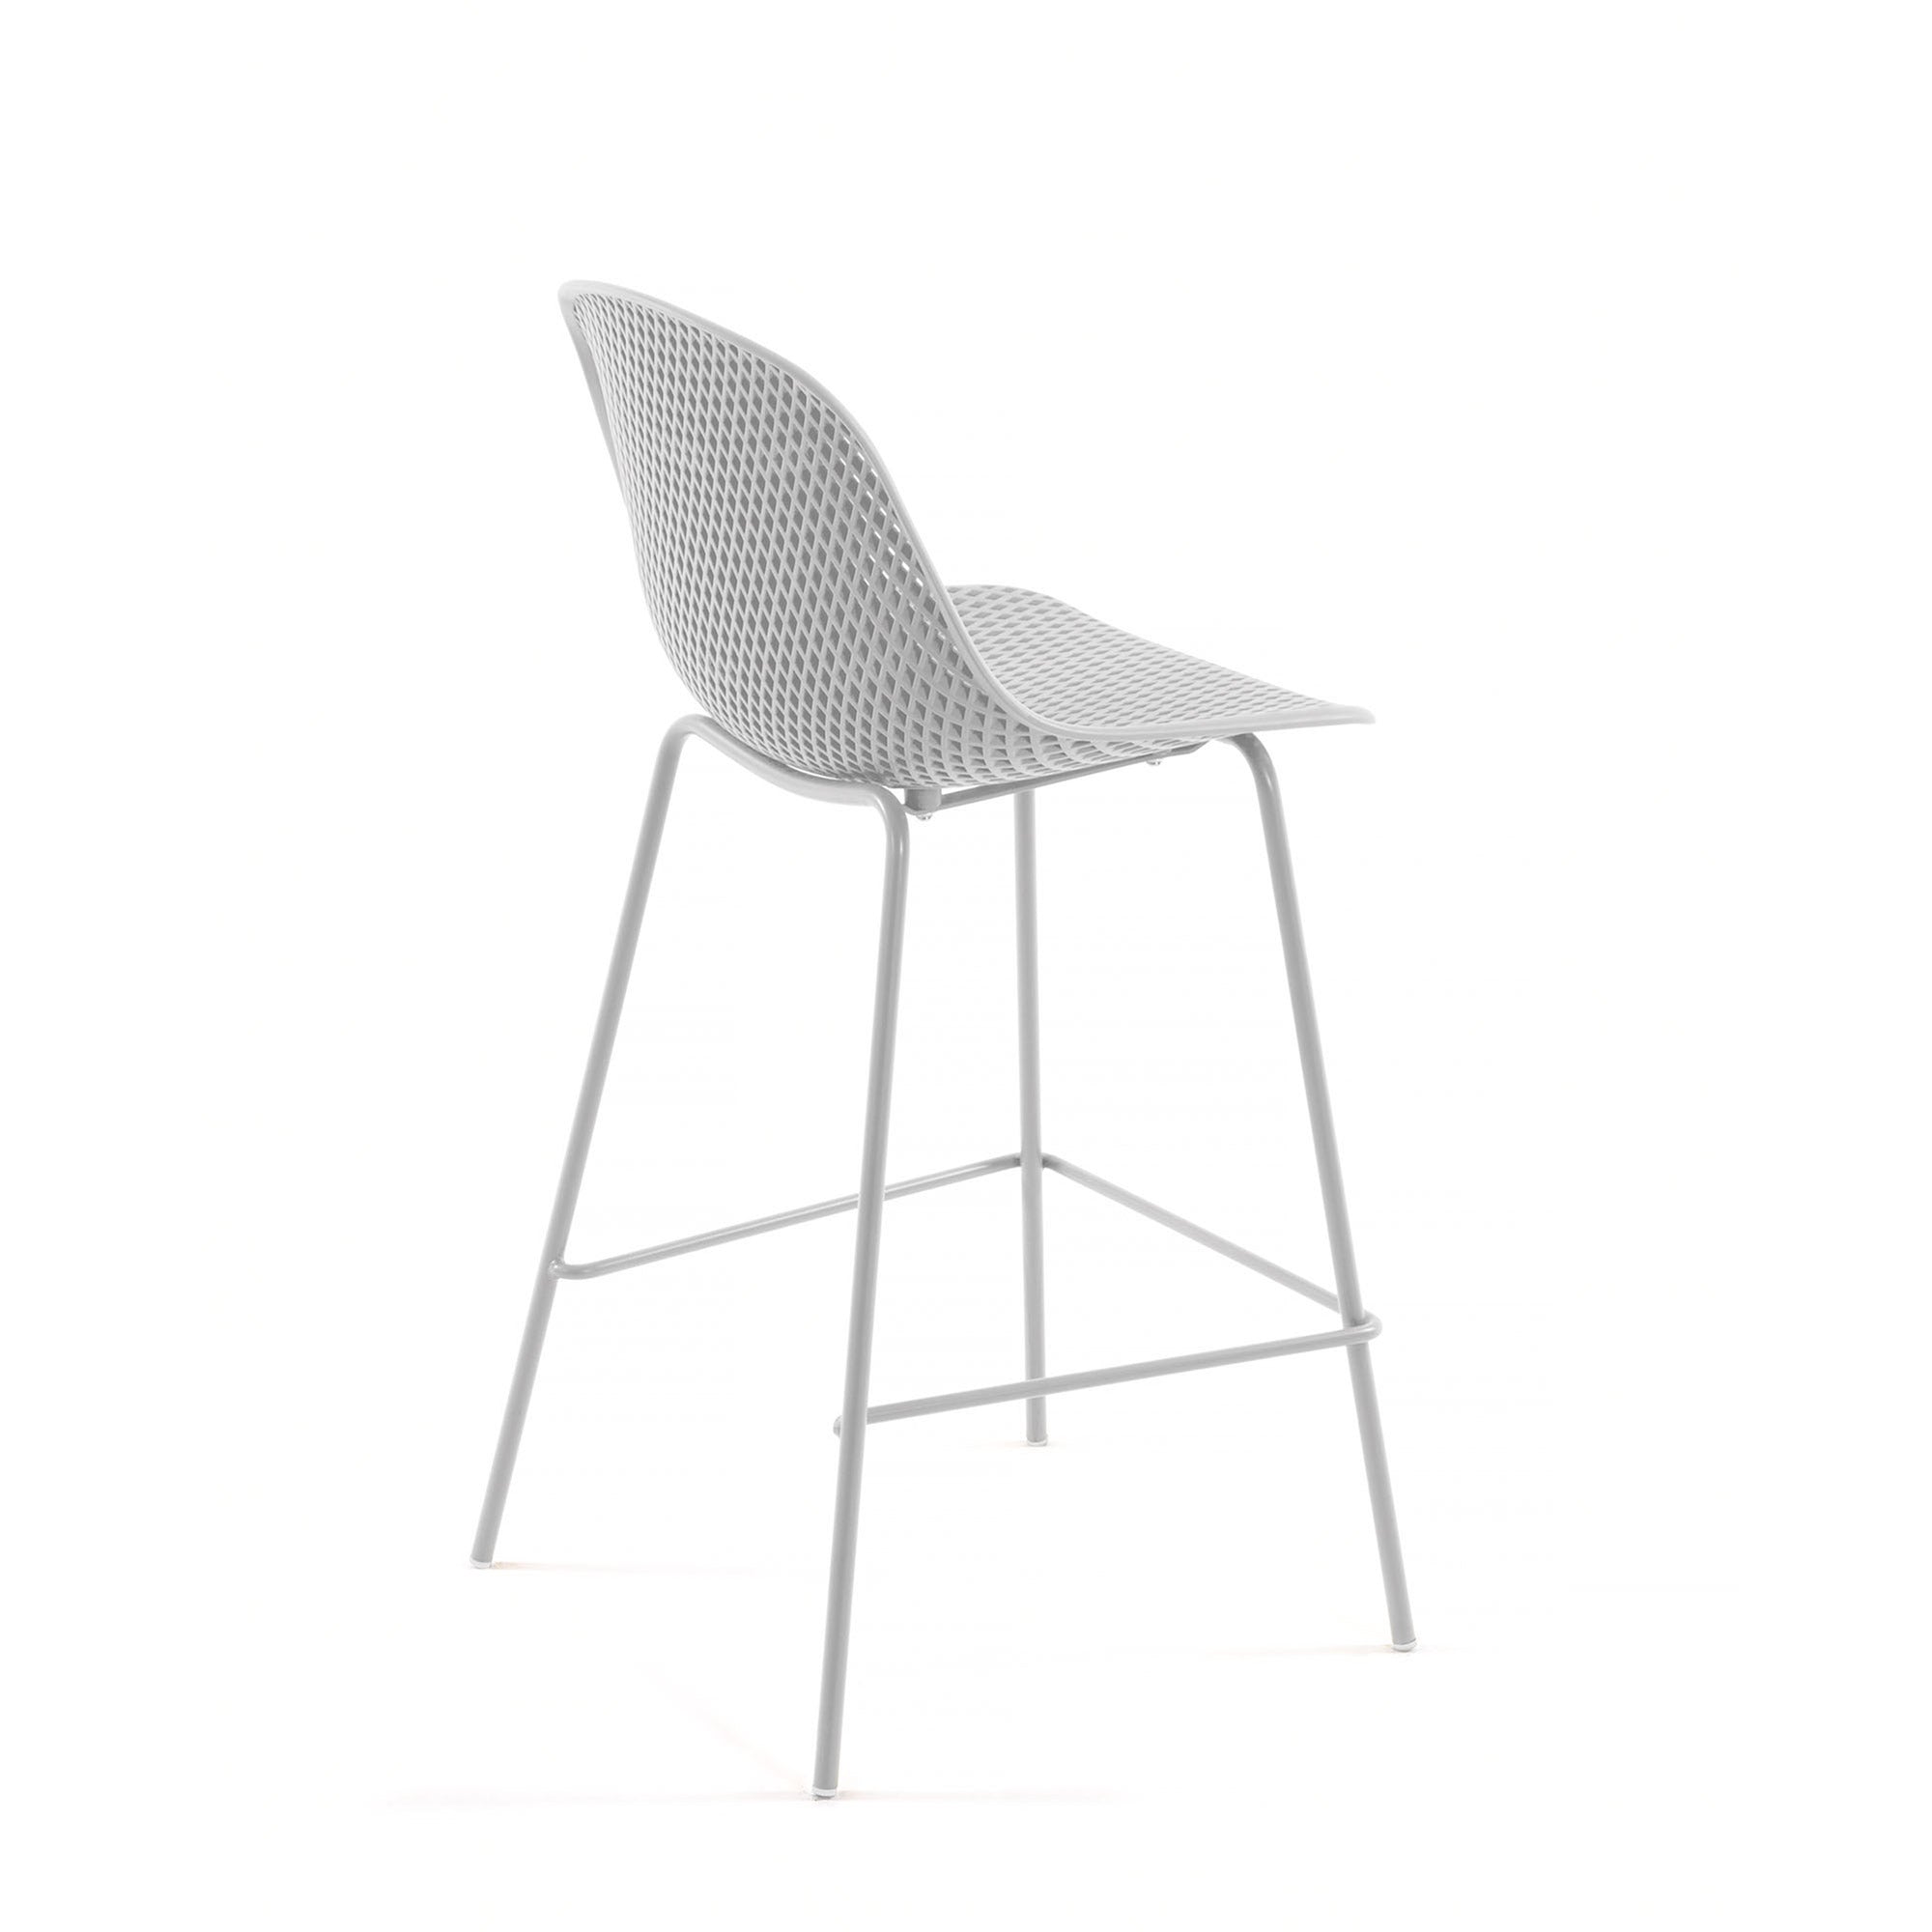 Quinby outdoor stool in white, height 75 cm